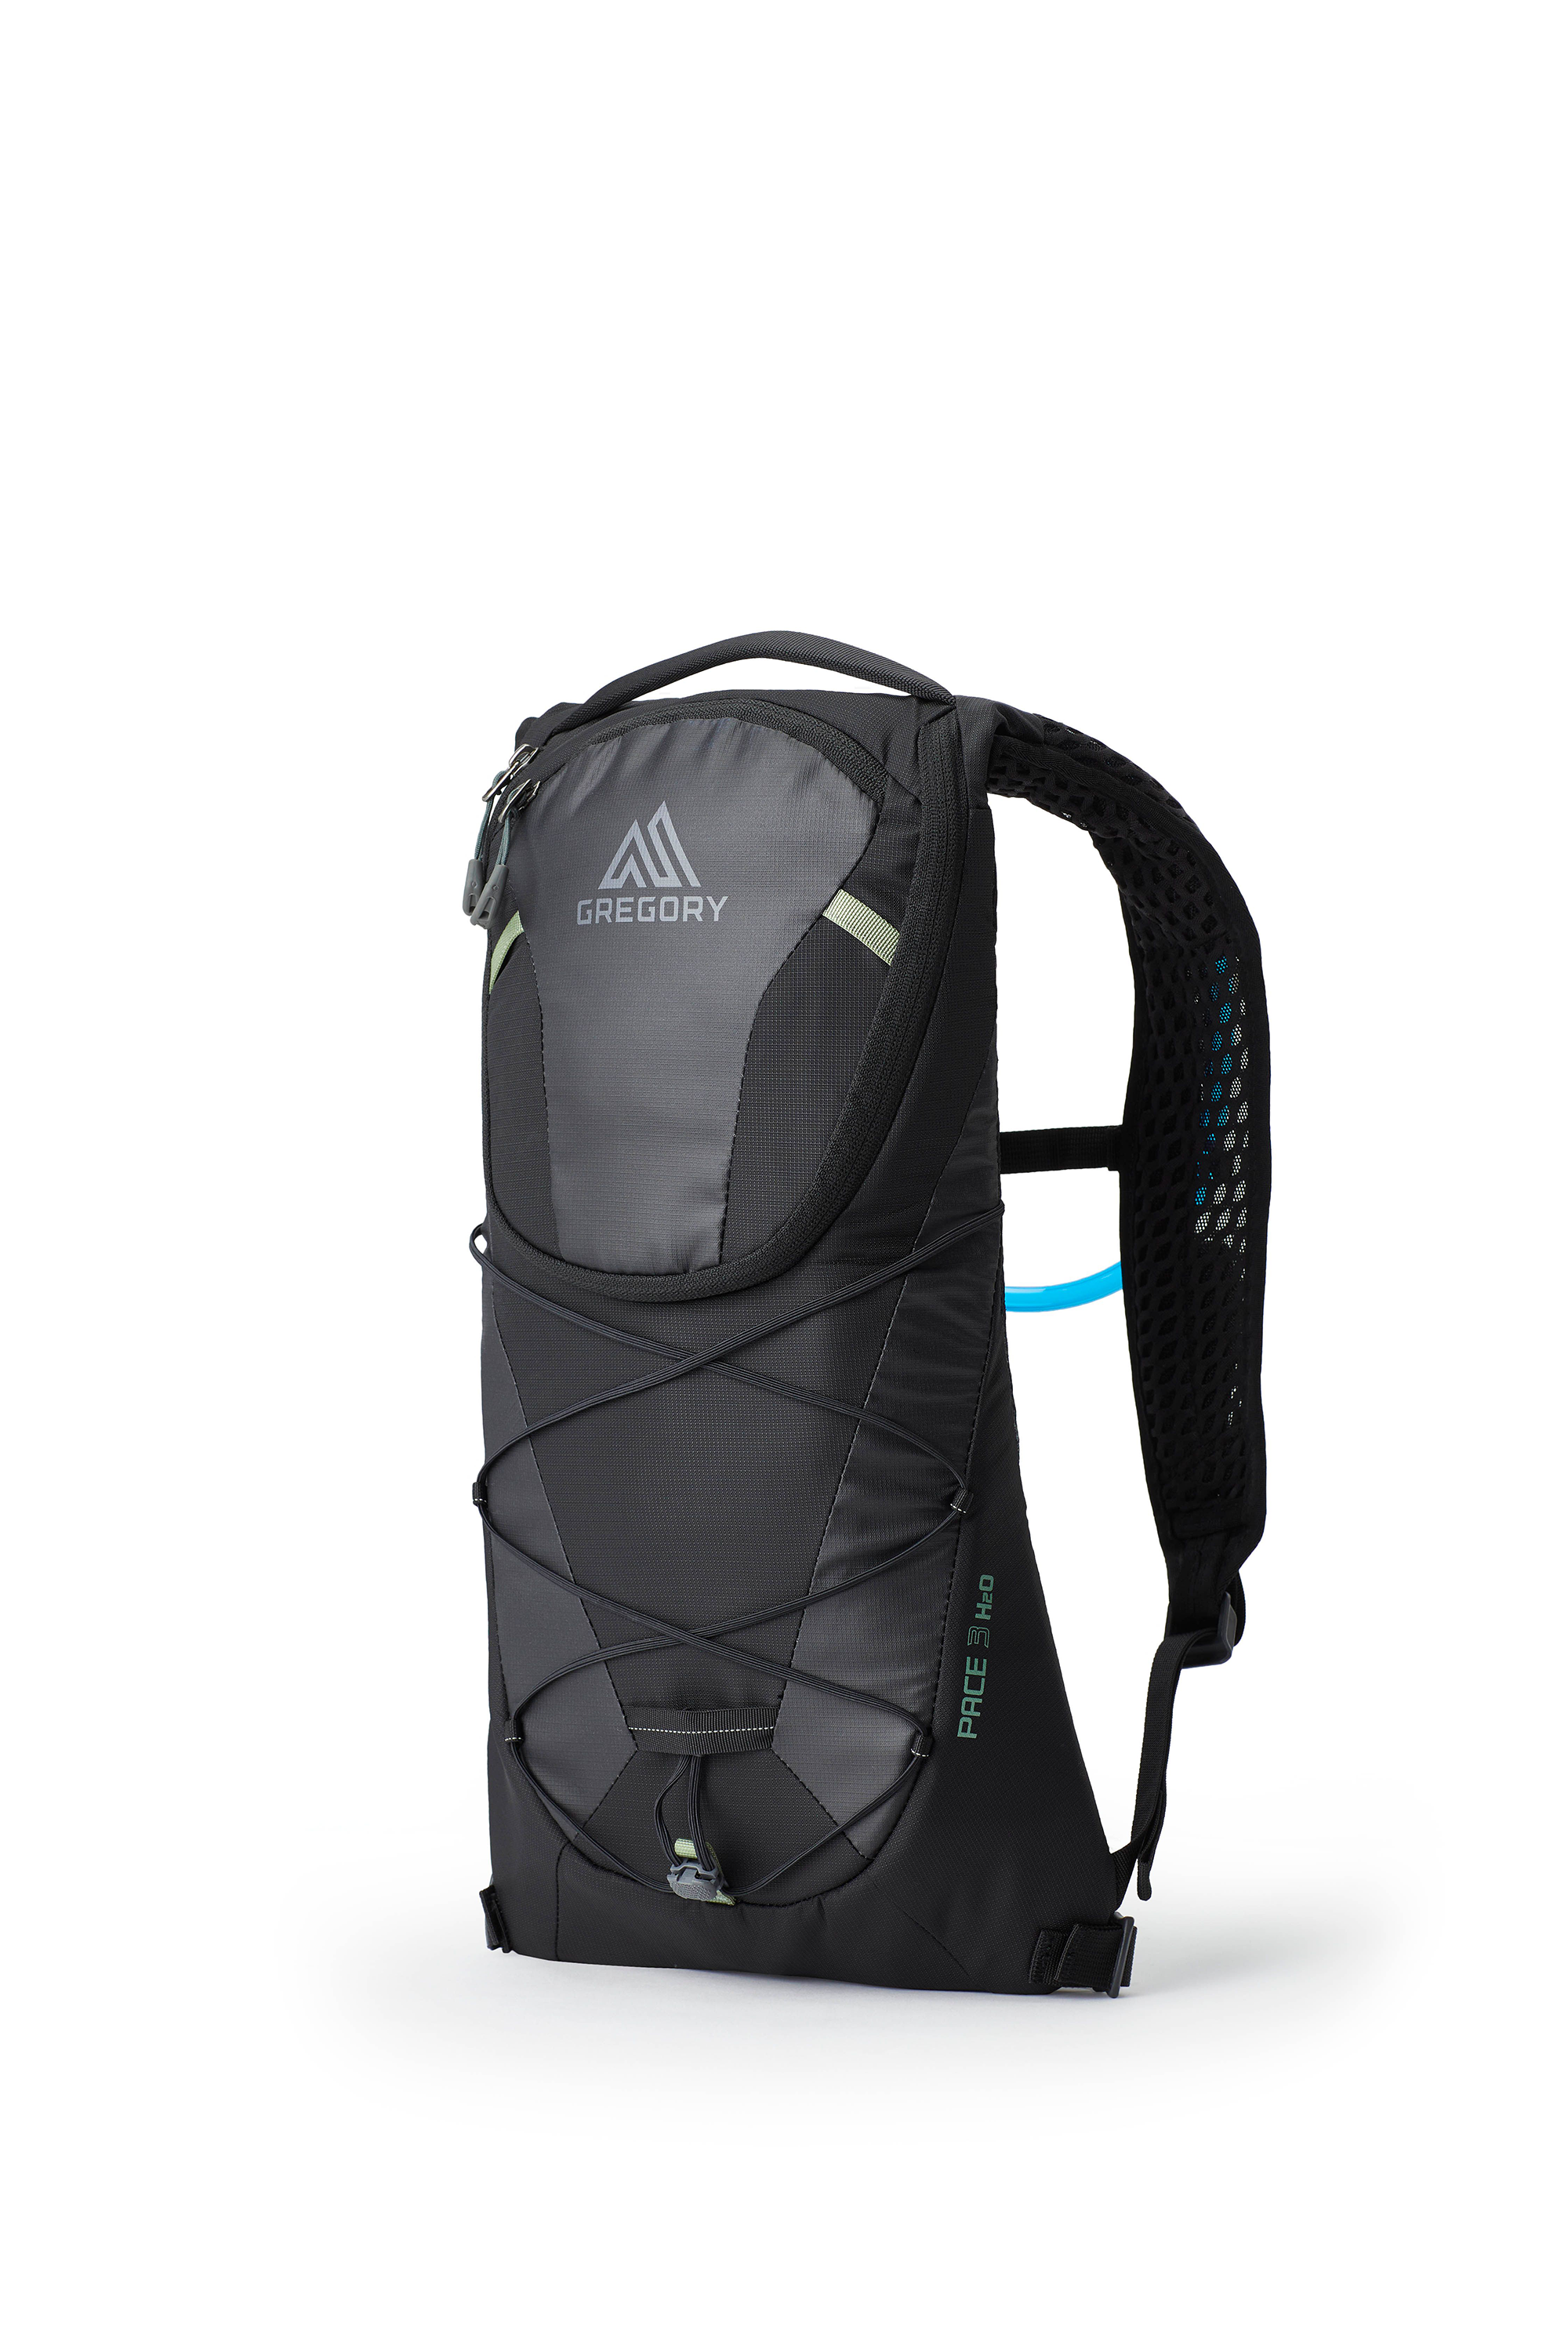 Gregory Pace 3 H2O Hydration Pack for Ladies - Black Ice